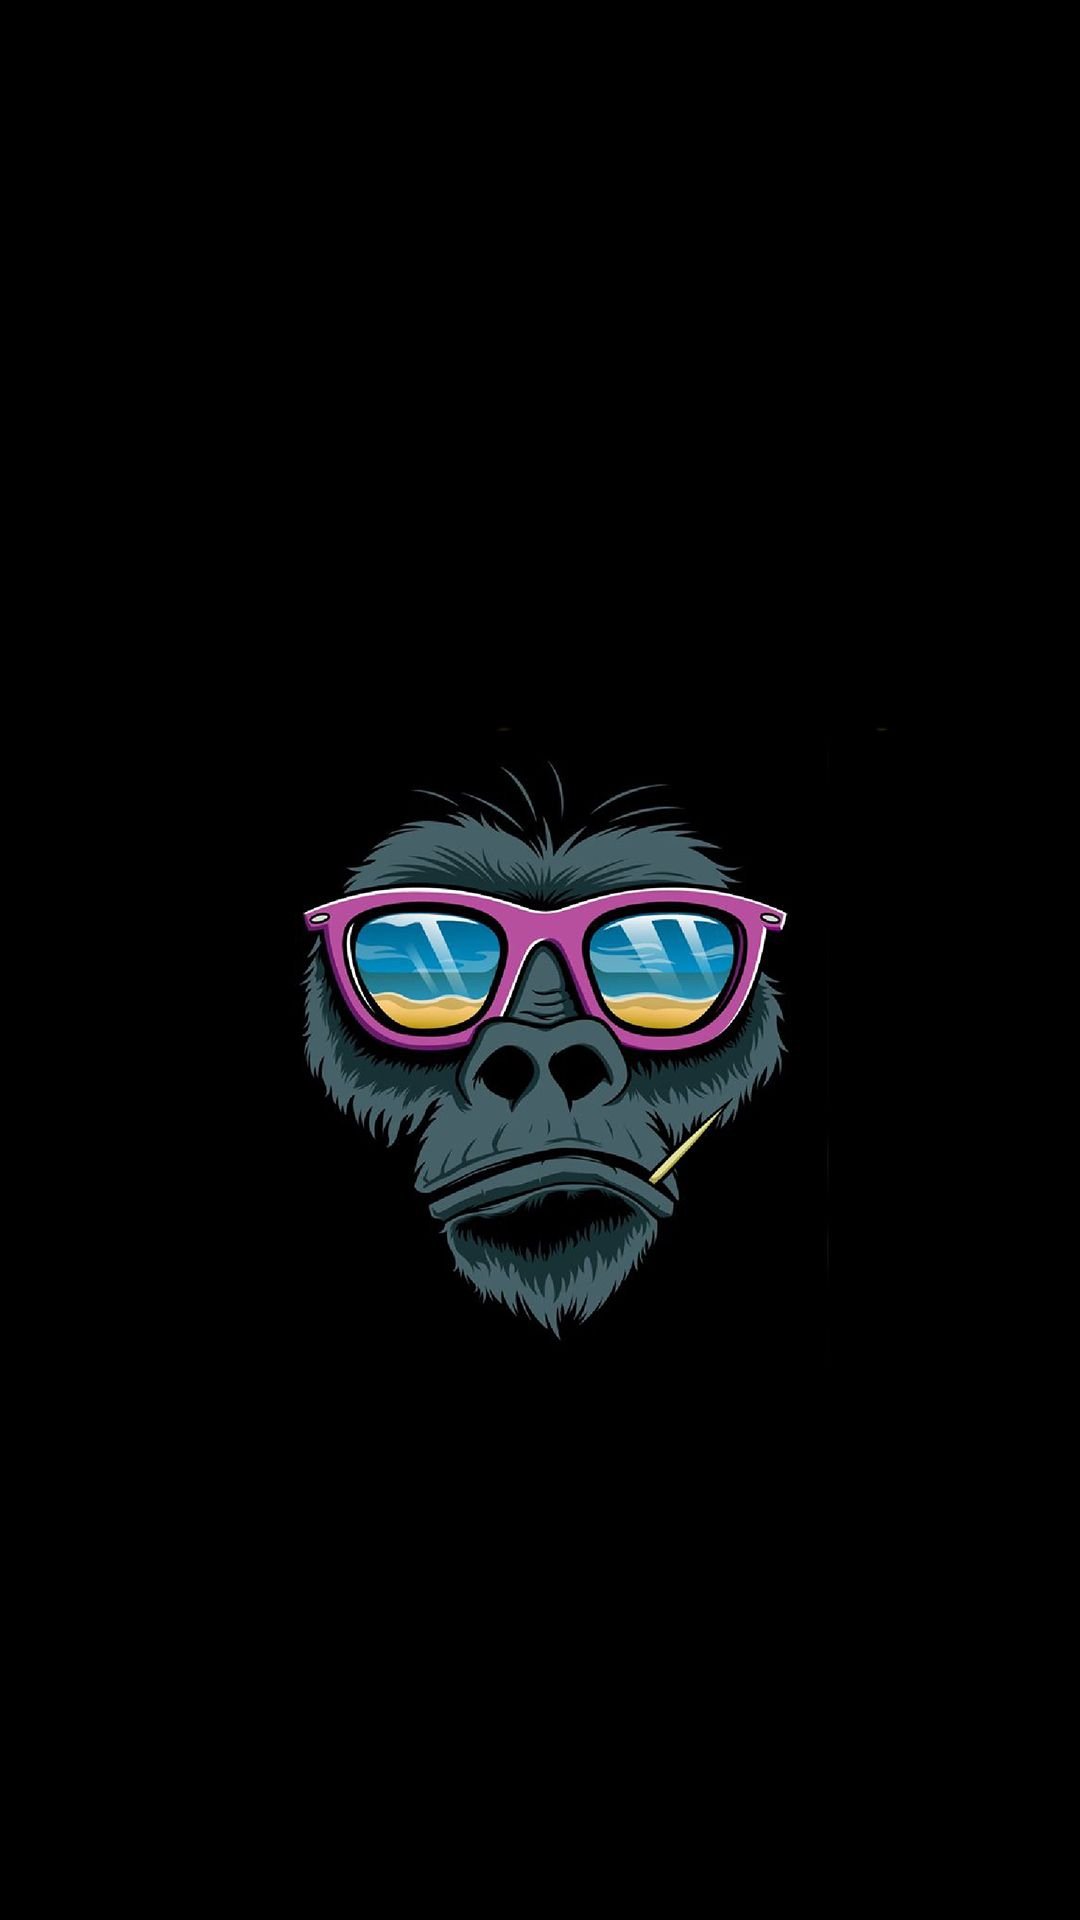 A Gorilla Wearing Sunglasses On A Black Background